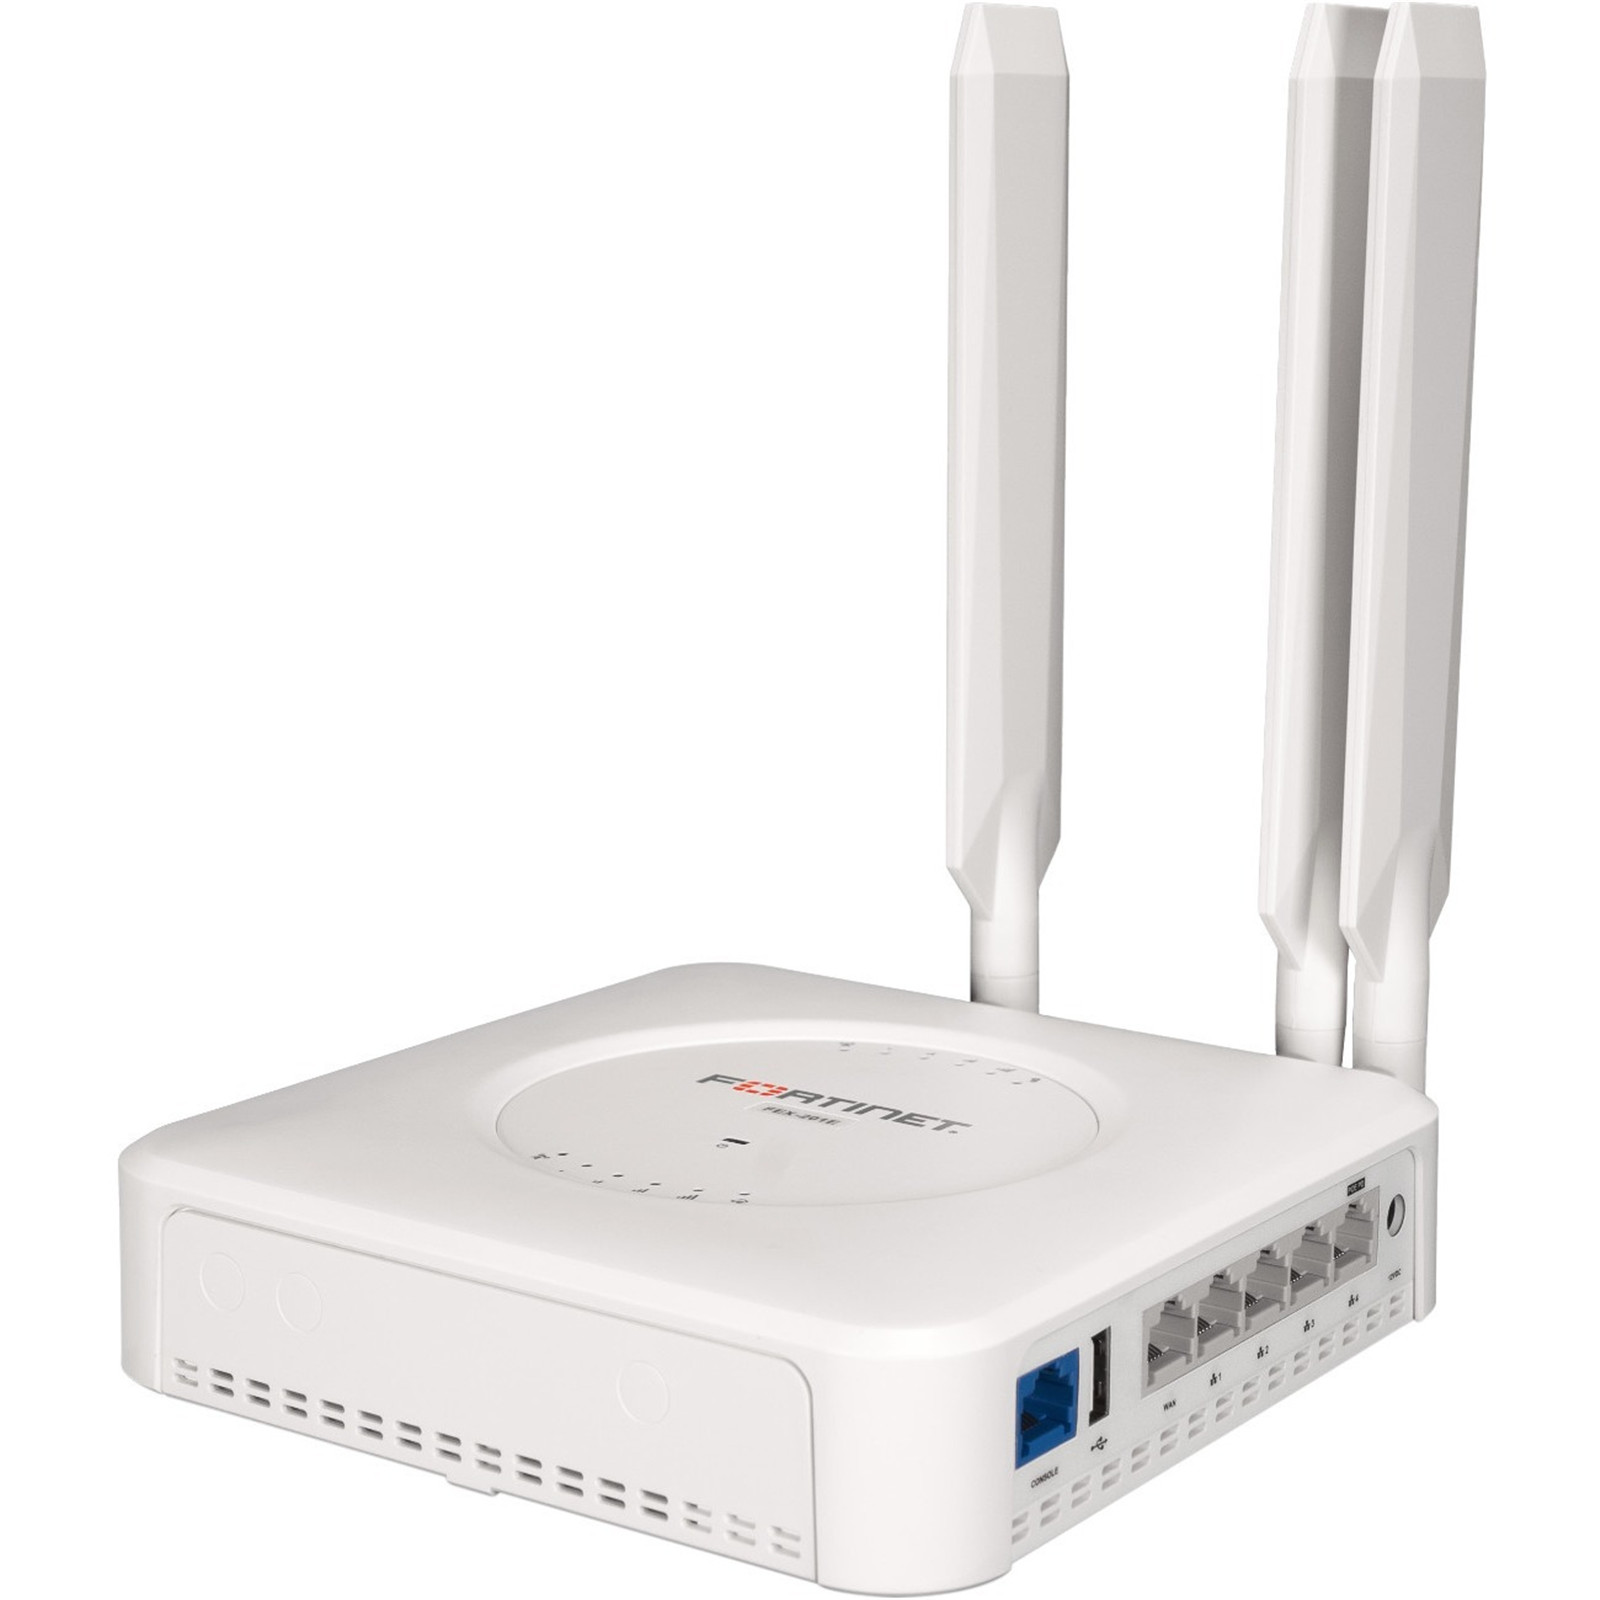 Buy the Fortinet FortiExtender FEX-201E 2 SIM Ethernet - Cellular Wireless...  ( FEX-201E ) online - PBTech.com